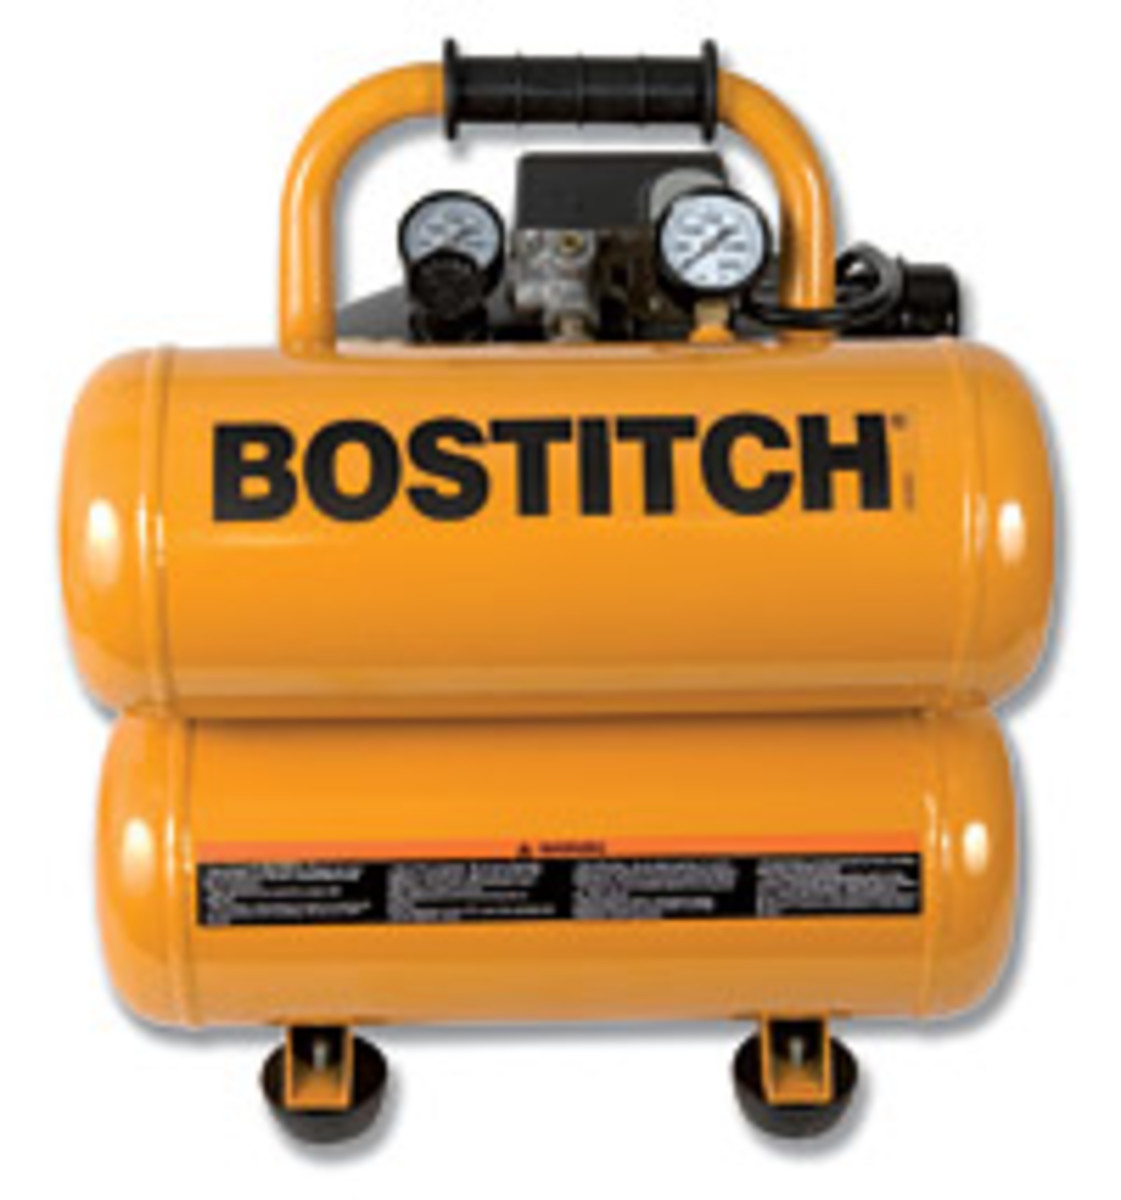 Free Shipping! Bostitch Compressor Fans #633718 New In Packaging 